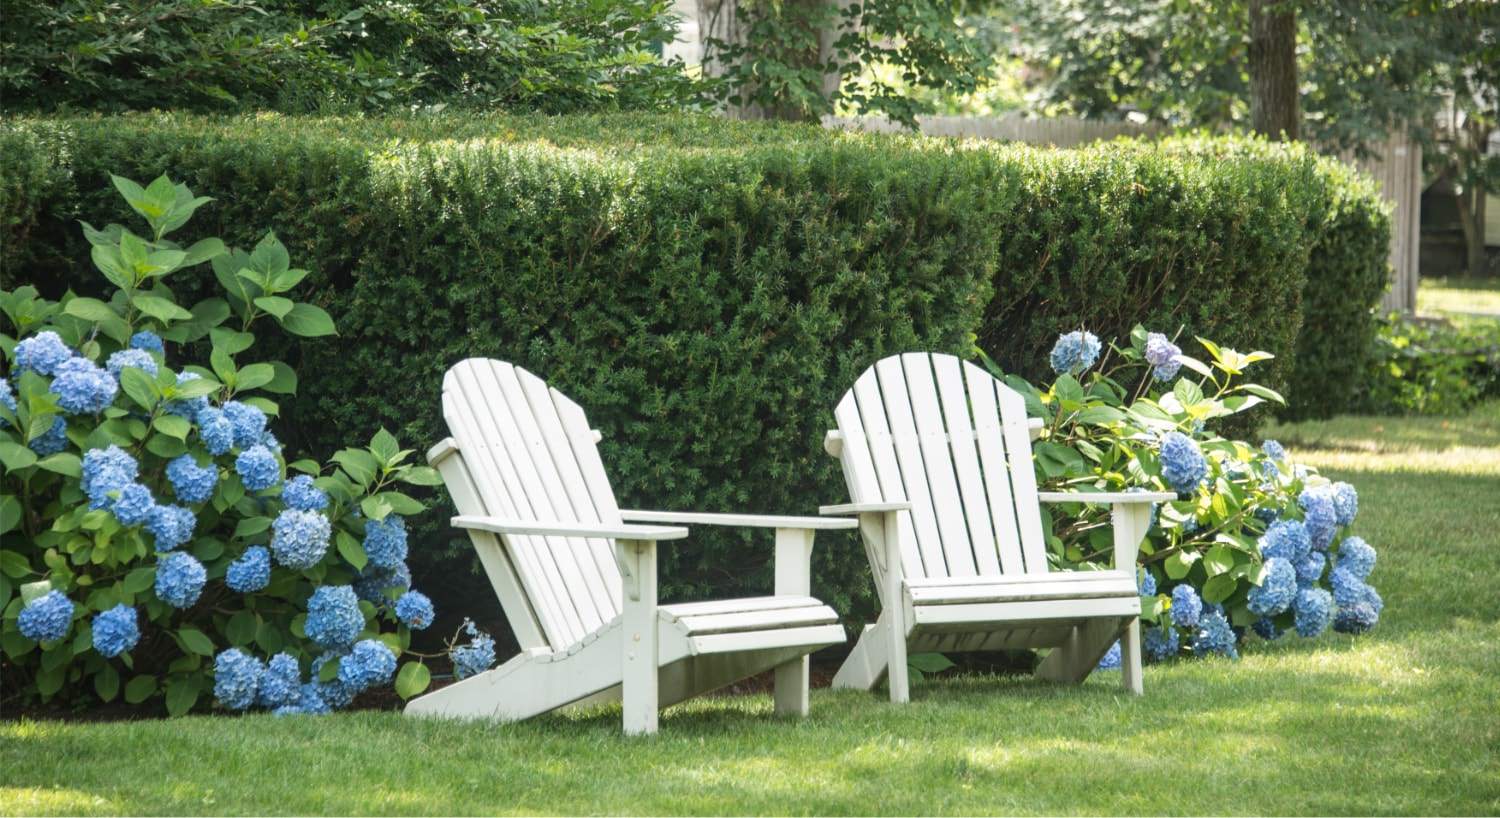 Two white Adirondack chairs sitting in green grass next to trimmed green shrubs and bushes with blue flowers